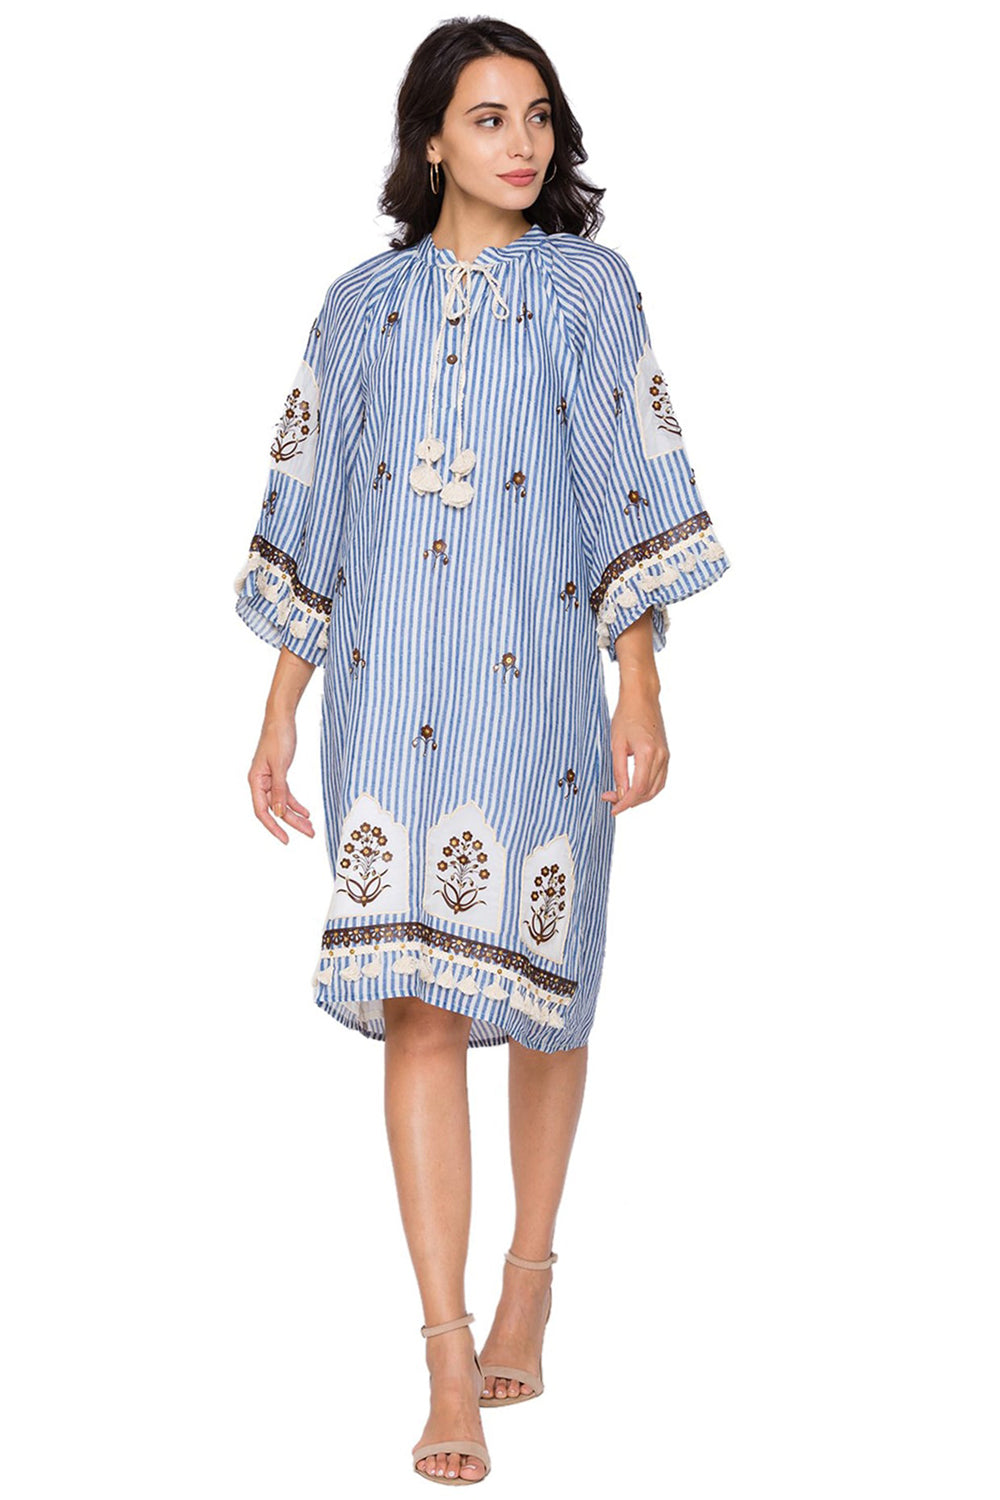 Sartorial Printed Short Dress With Leather Cutwork Embroidery And Neck Tie Up